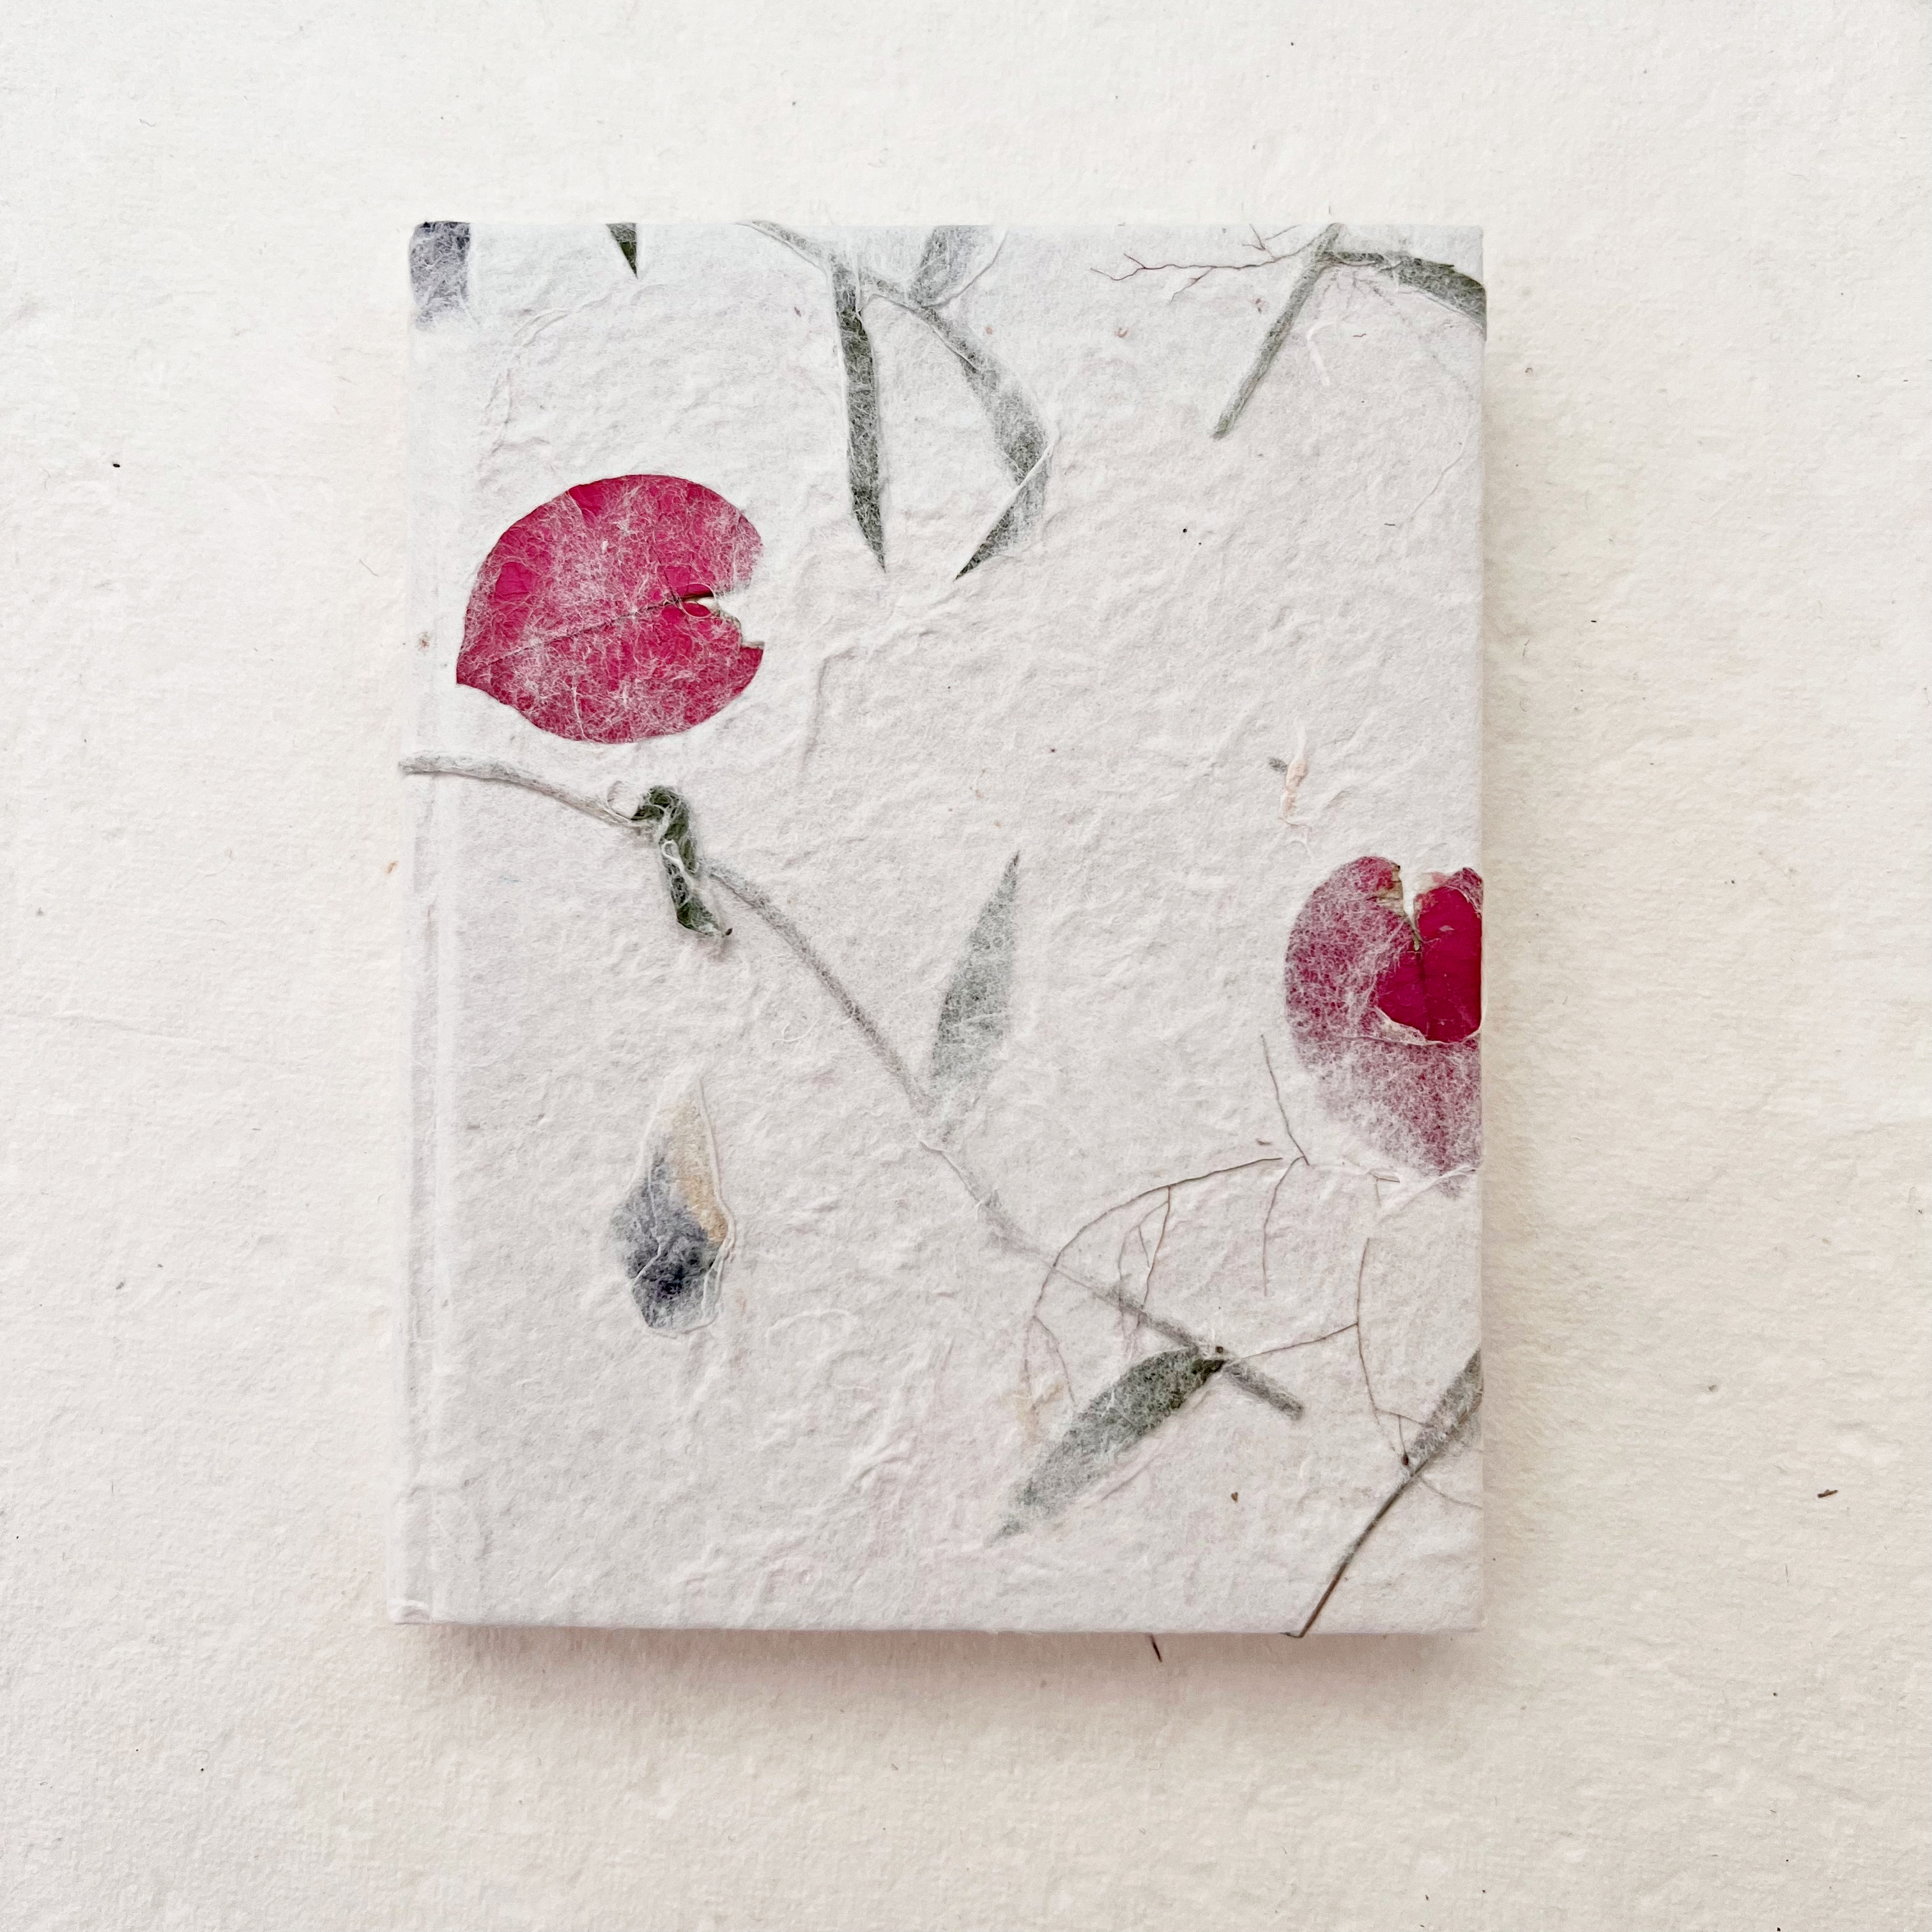 Notebook size 15x11cm flowermixed mulberry paper on the cover, 64 pgs ivory paper